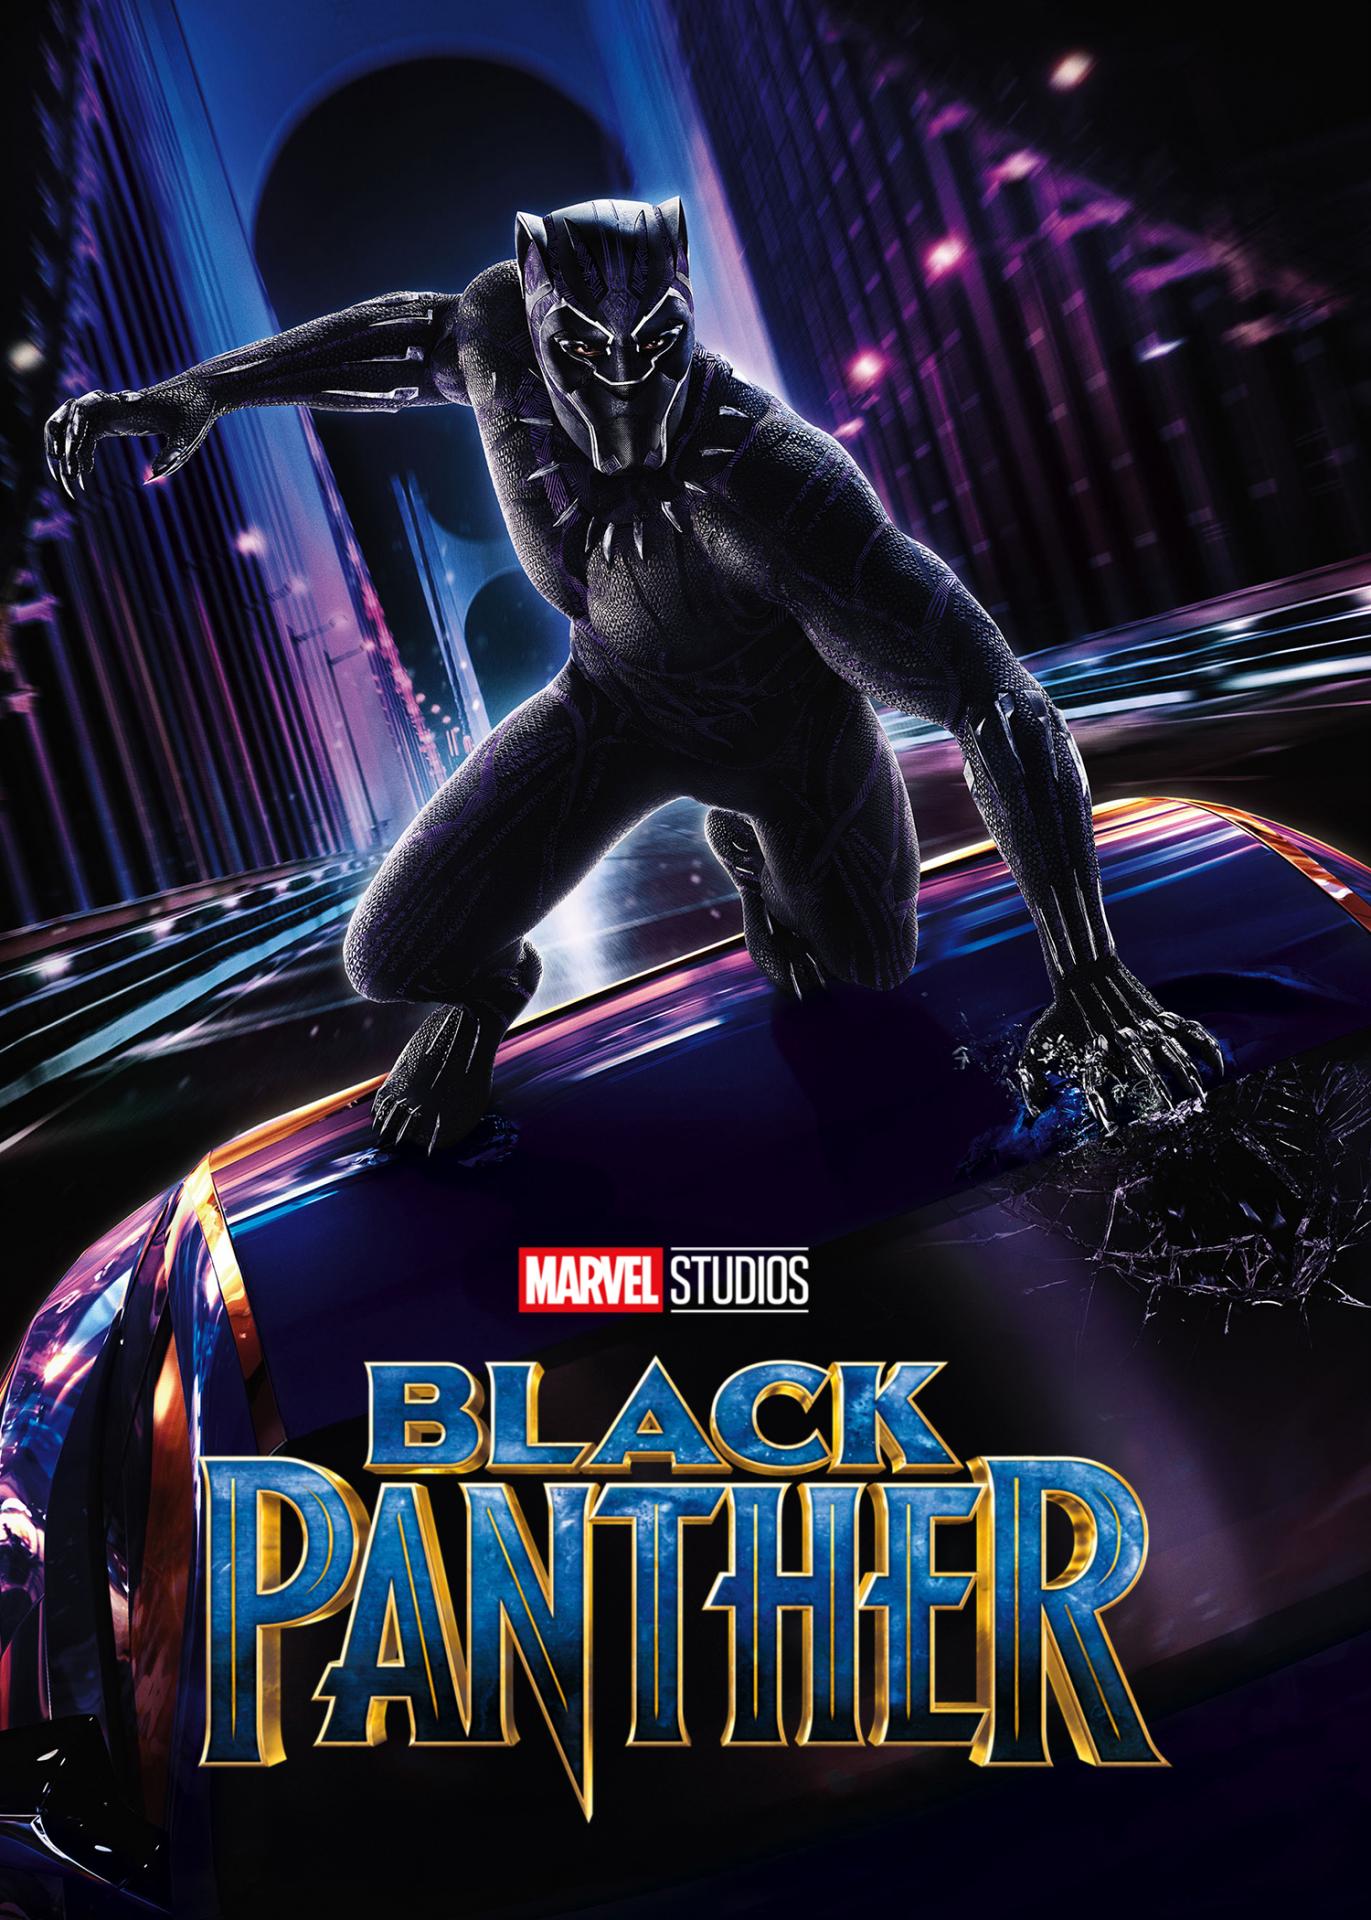 Blackpanther2018 textless